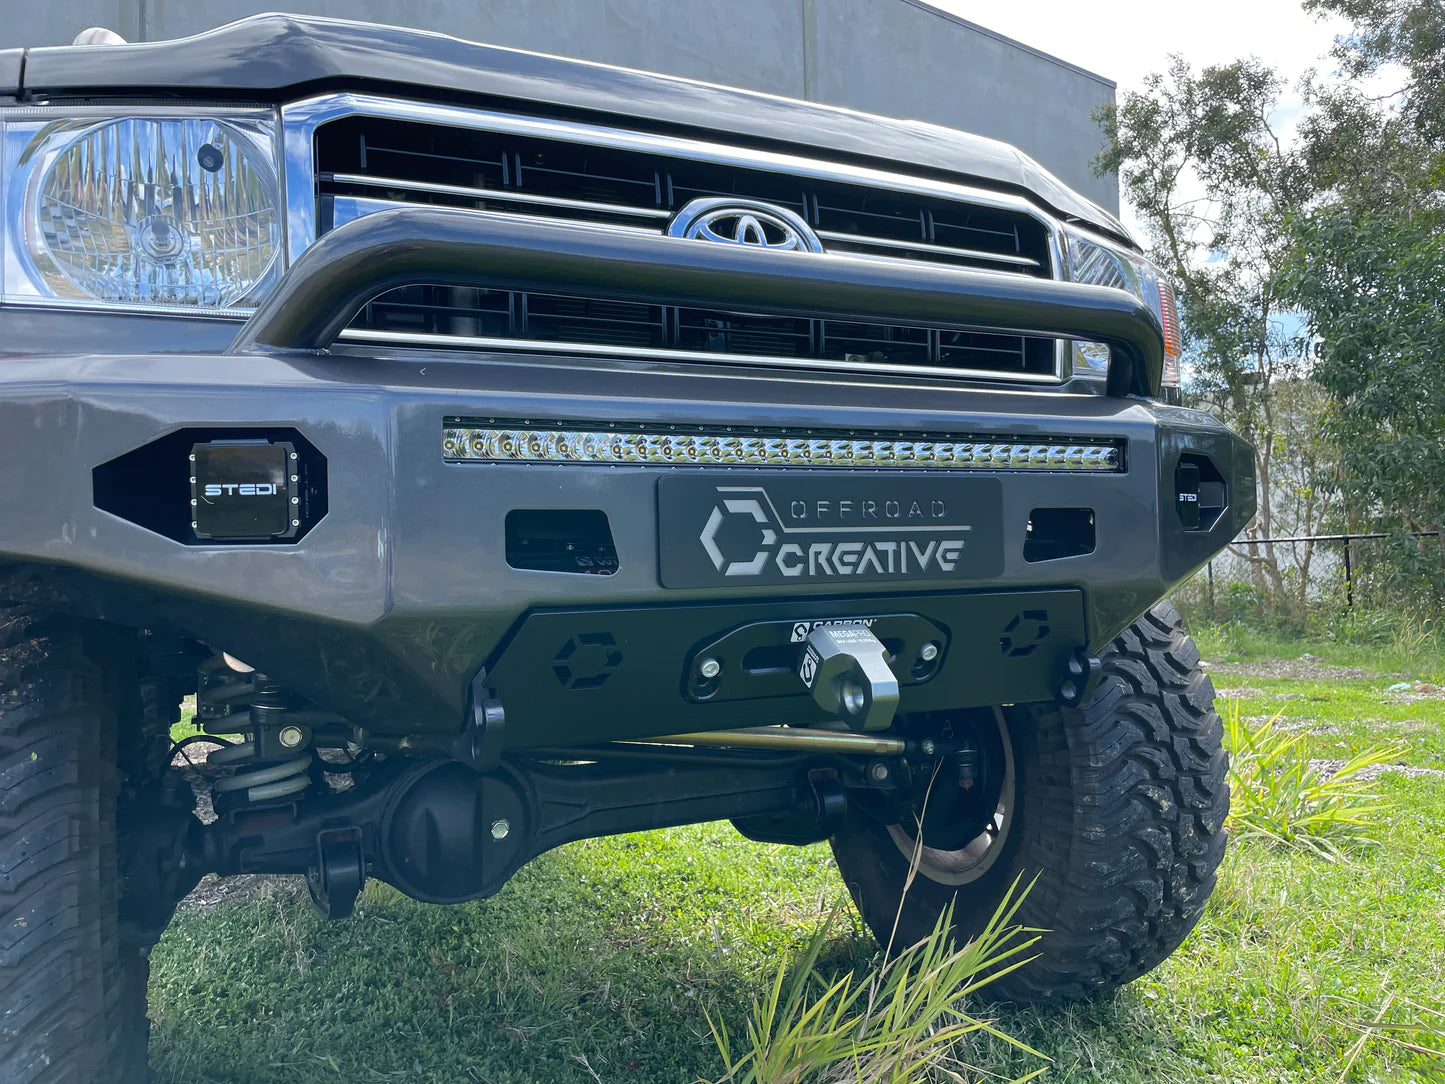 Offroad Creative Bull Bar to suit 70 Series Landcruiser 2007 - 2022